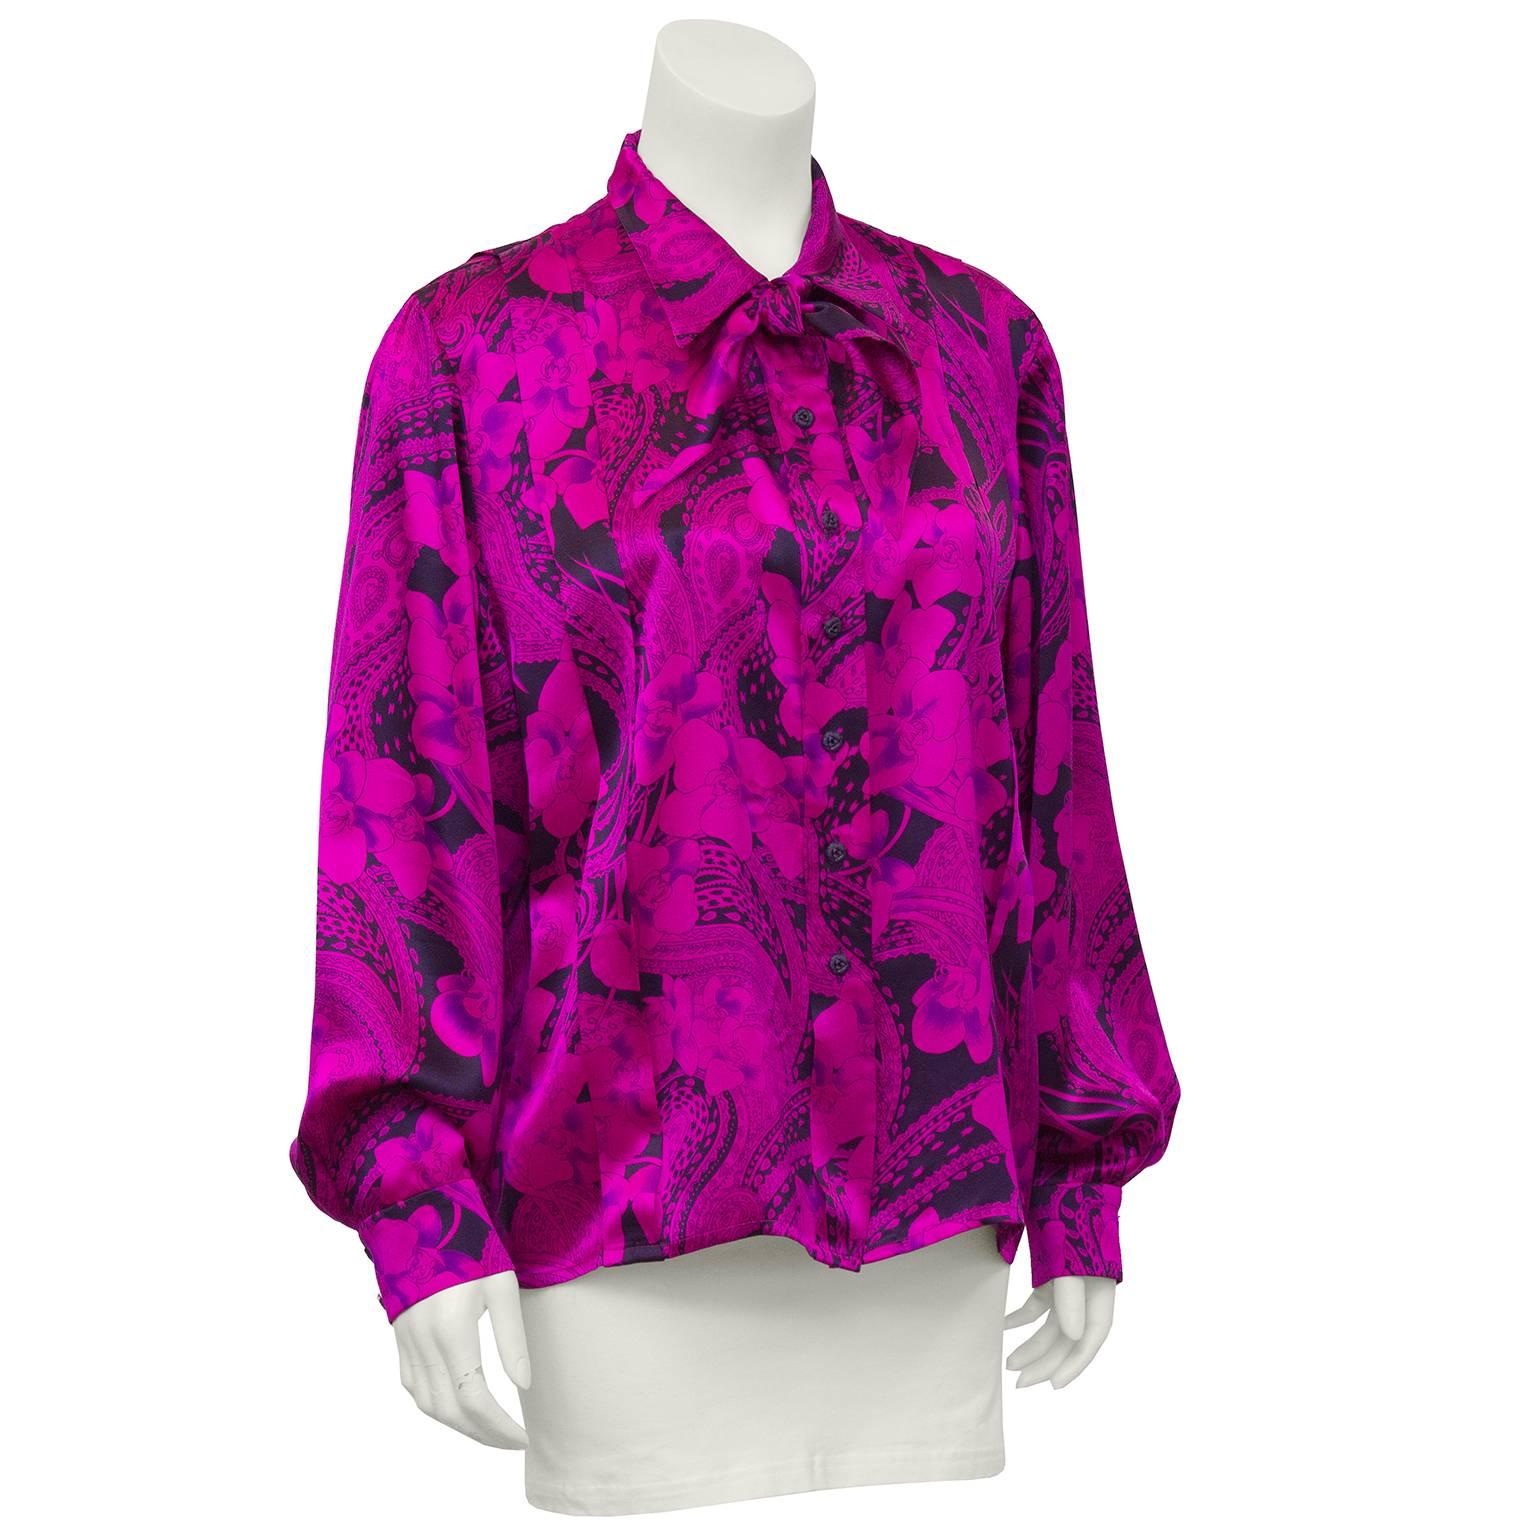 1980's Scherrer hot pink and black silk/satin blouse featuring a print of orchids and paisley. Small tie at neck and bishop sleeves. Excellent vintage condition. Fits like a US 8. 

Sleeve 21" Shoulder 24" Bust 40" Waist 42" Hips